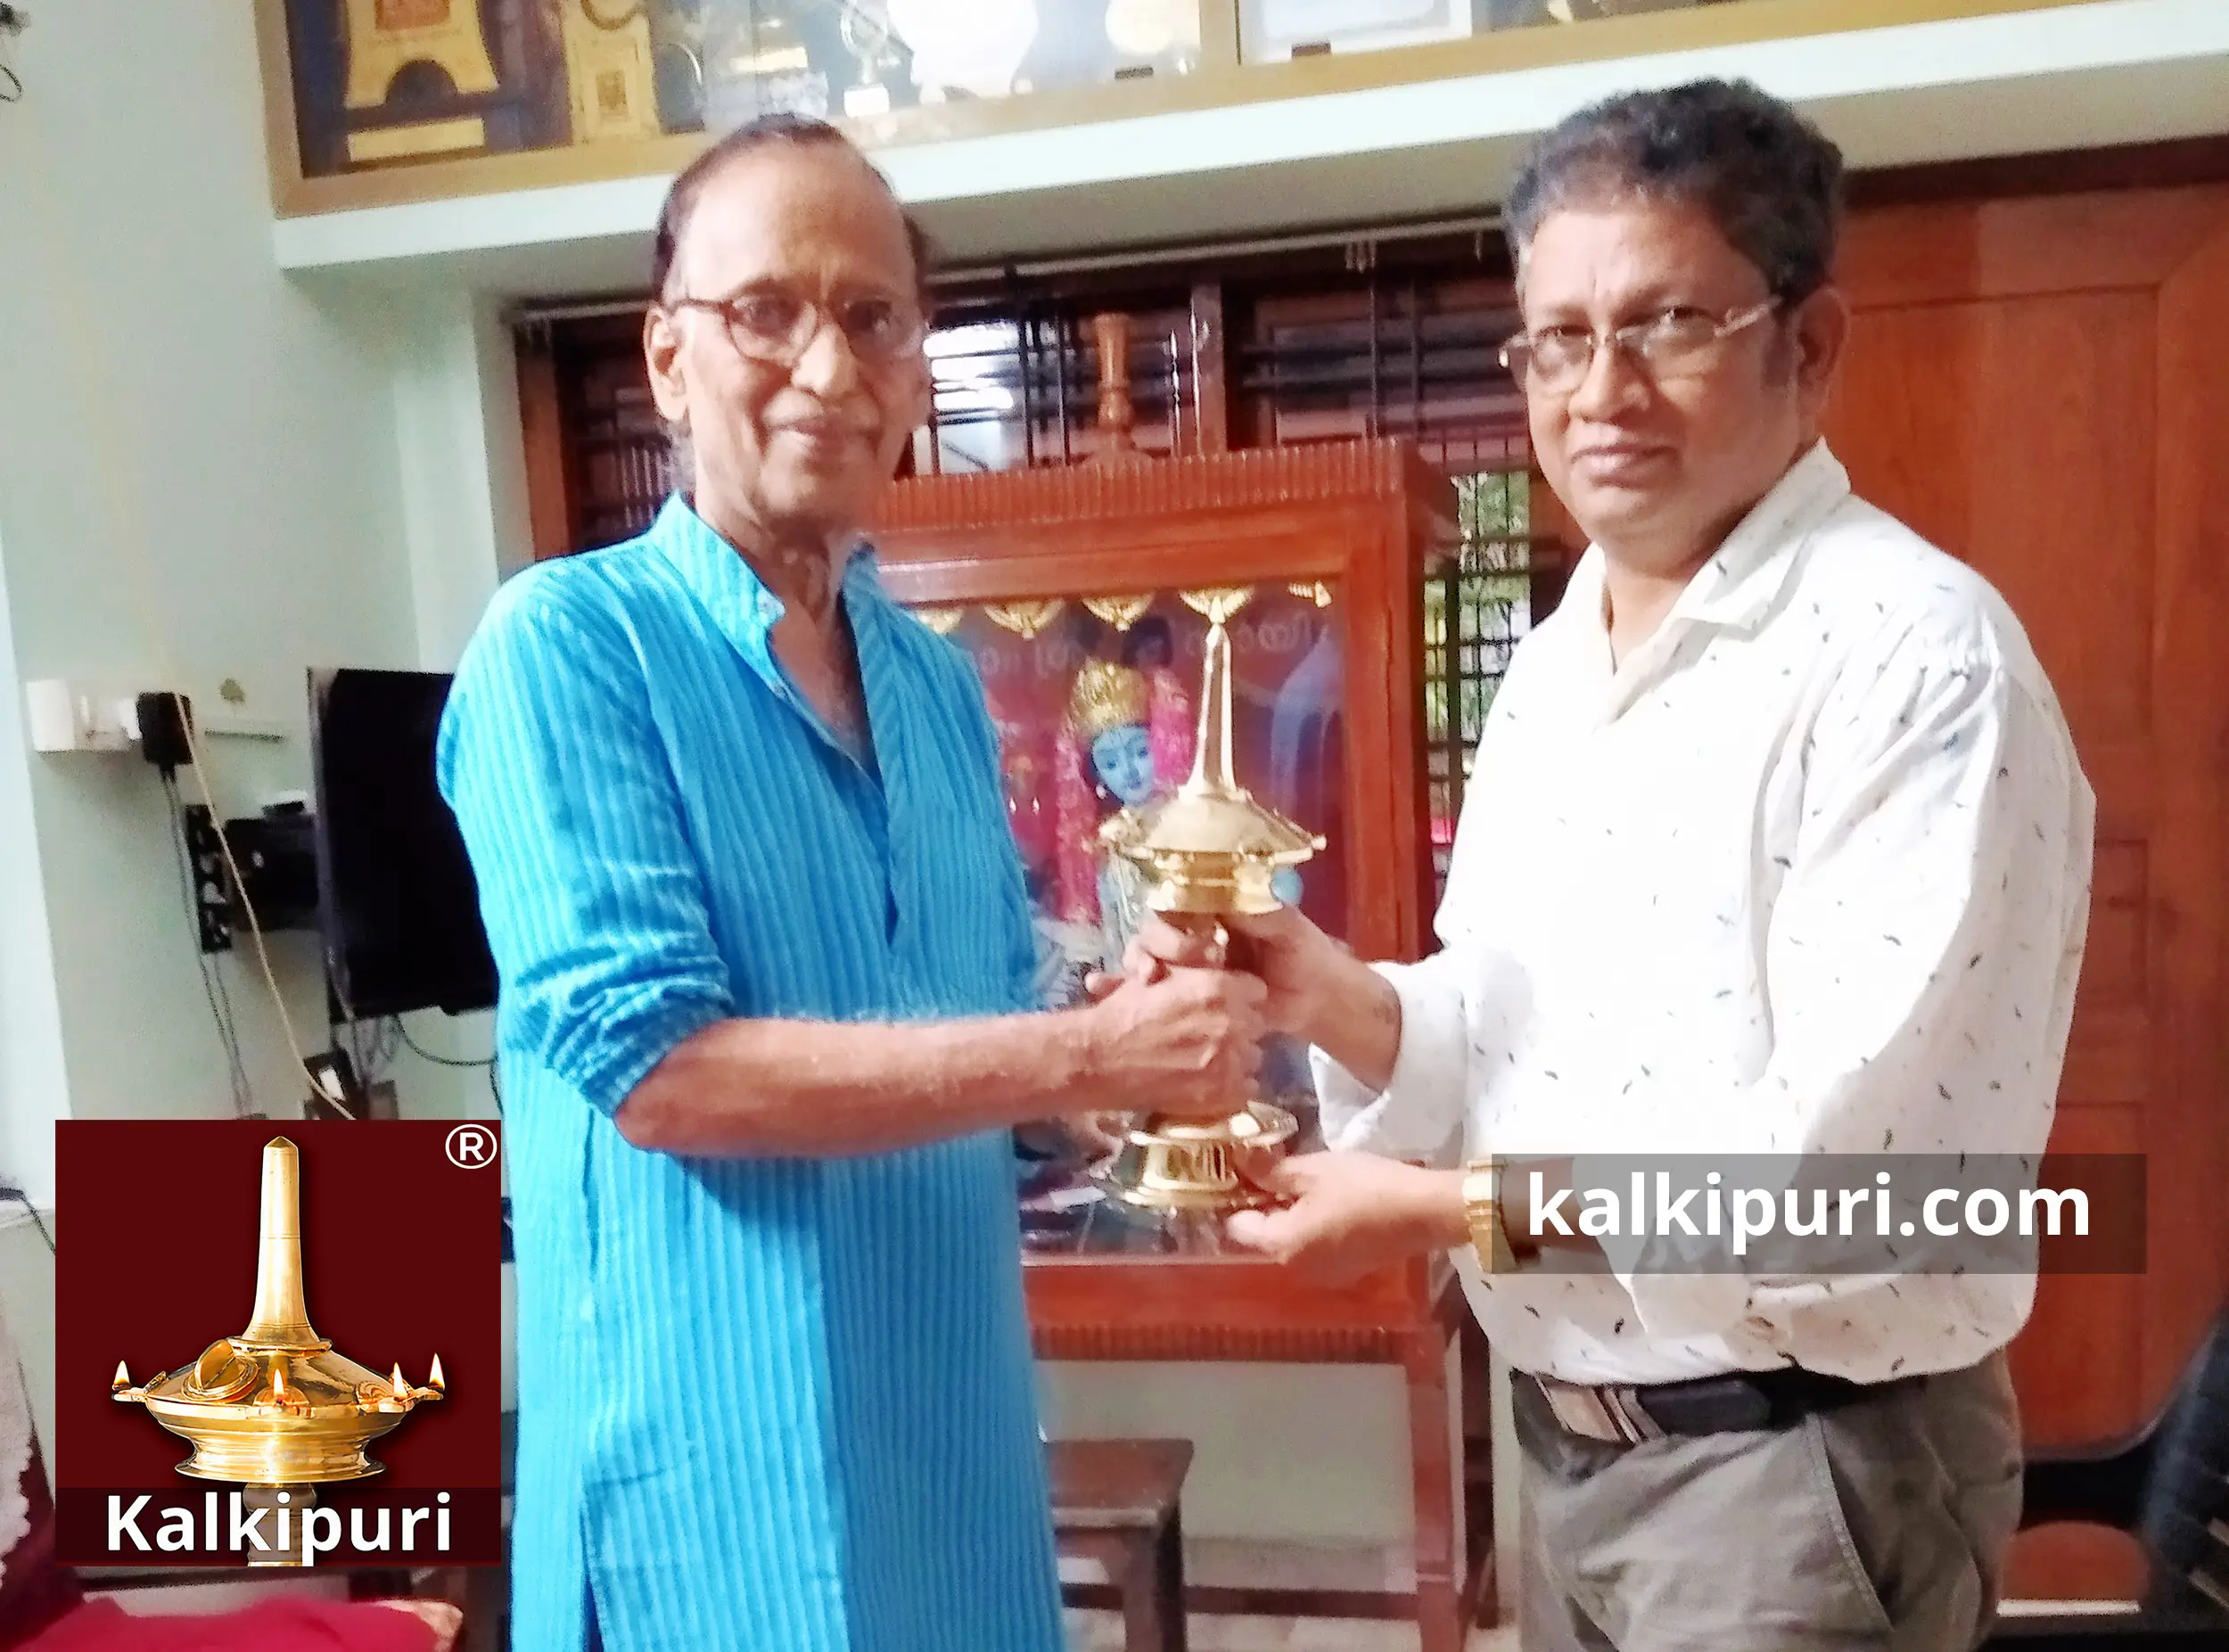 Renowned Malayalam writer Sri. P R Nathan received Patented Kalkipuri Insect Free Oil Lamp from Sri Mukundaraj at his house on 8 Apr 2022.